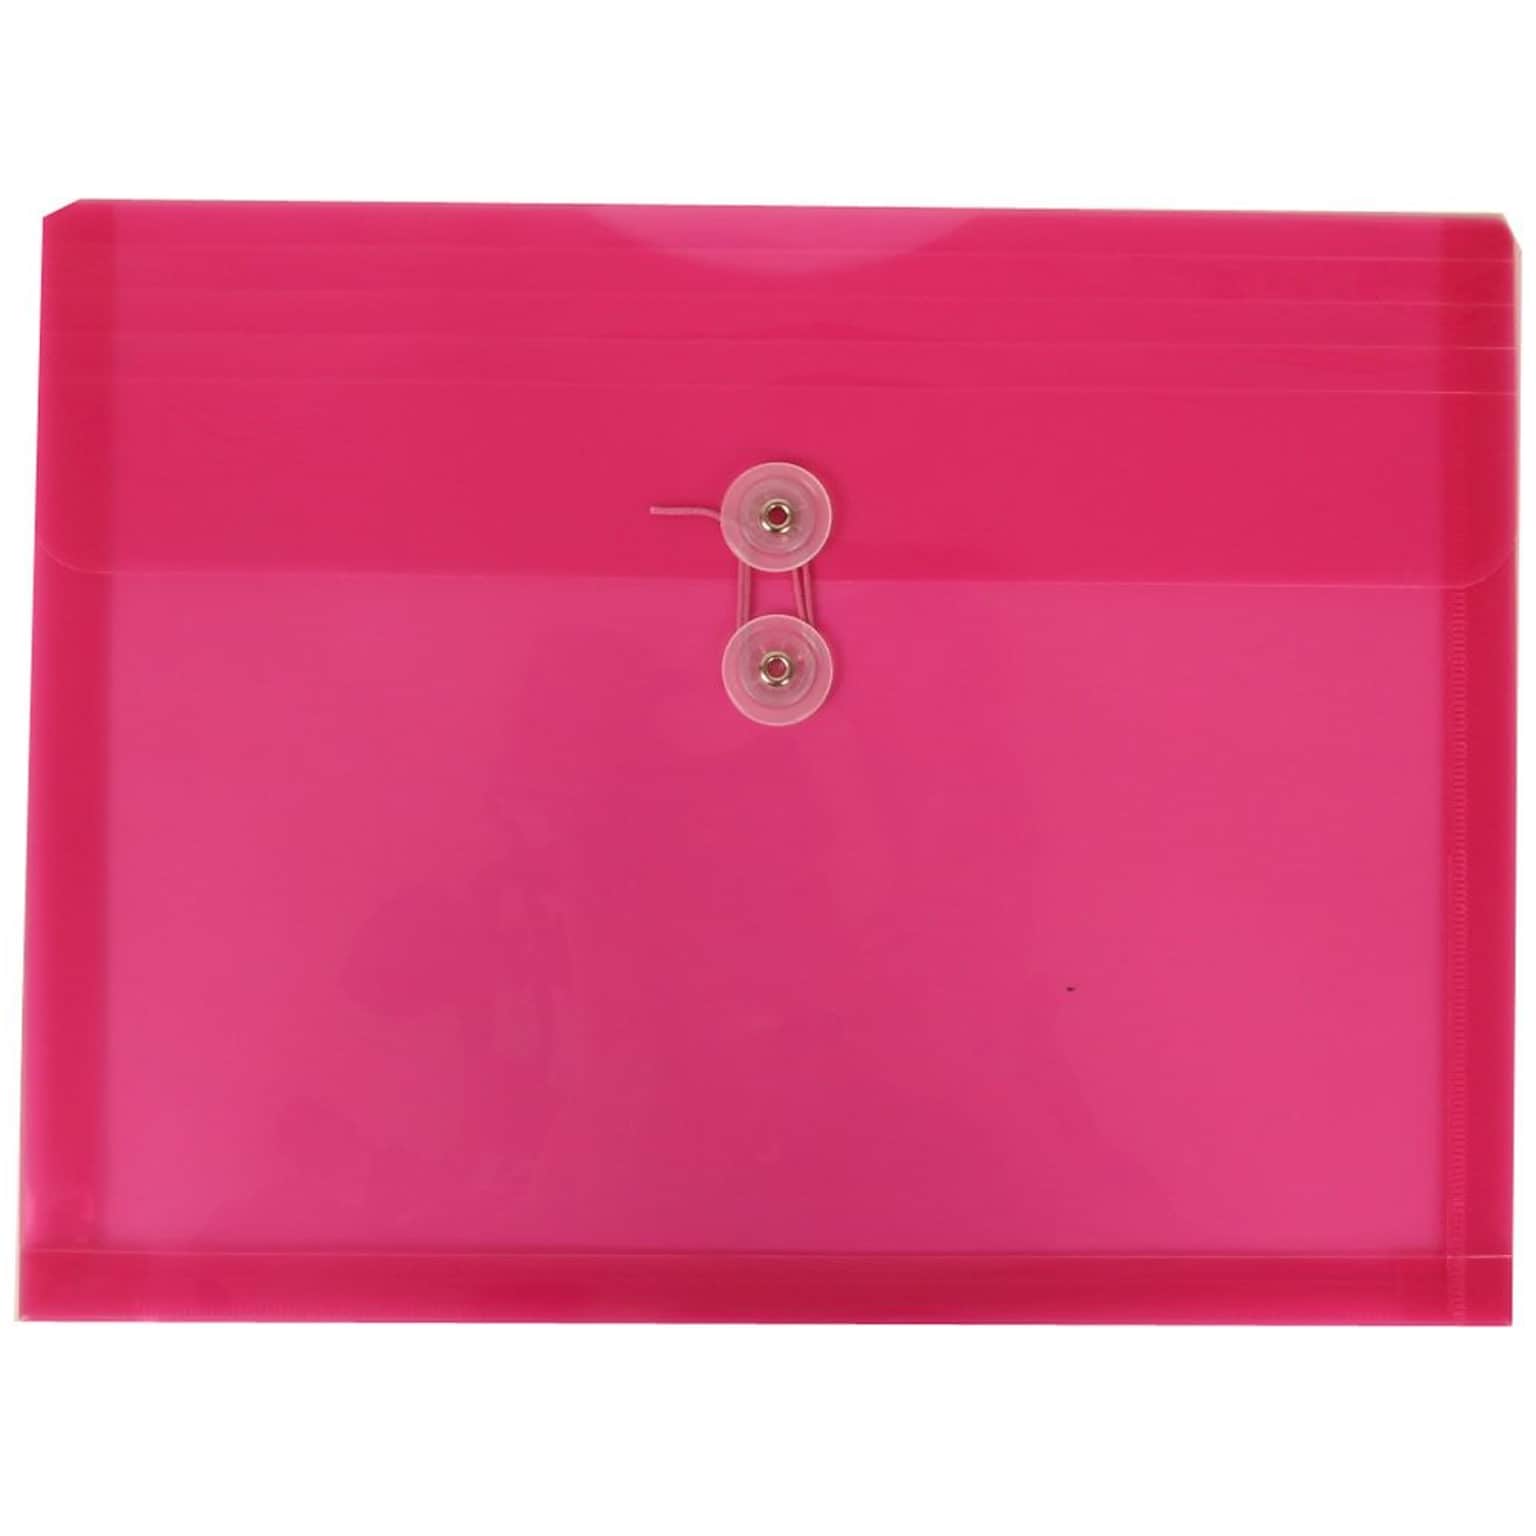 JAM Paper® Plastic Envelopes with Button and String Tie Closure, Letter Booklet, 9.75 x 13, Fuchsia Pink, 12/Pack (218B1FU)